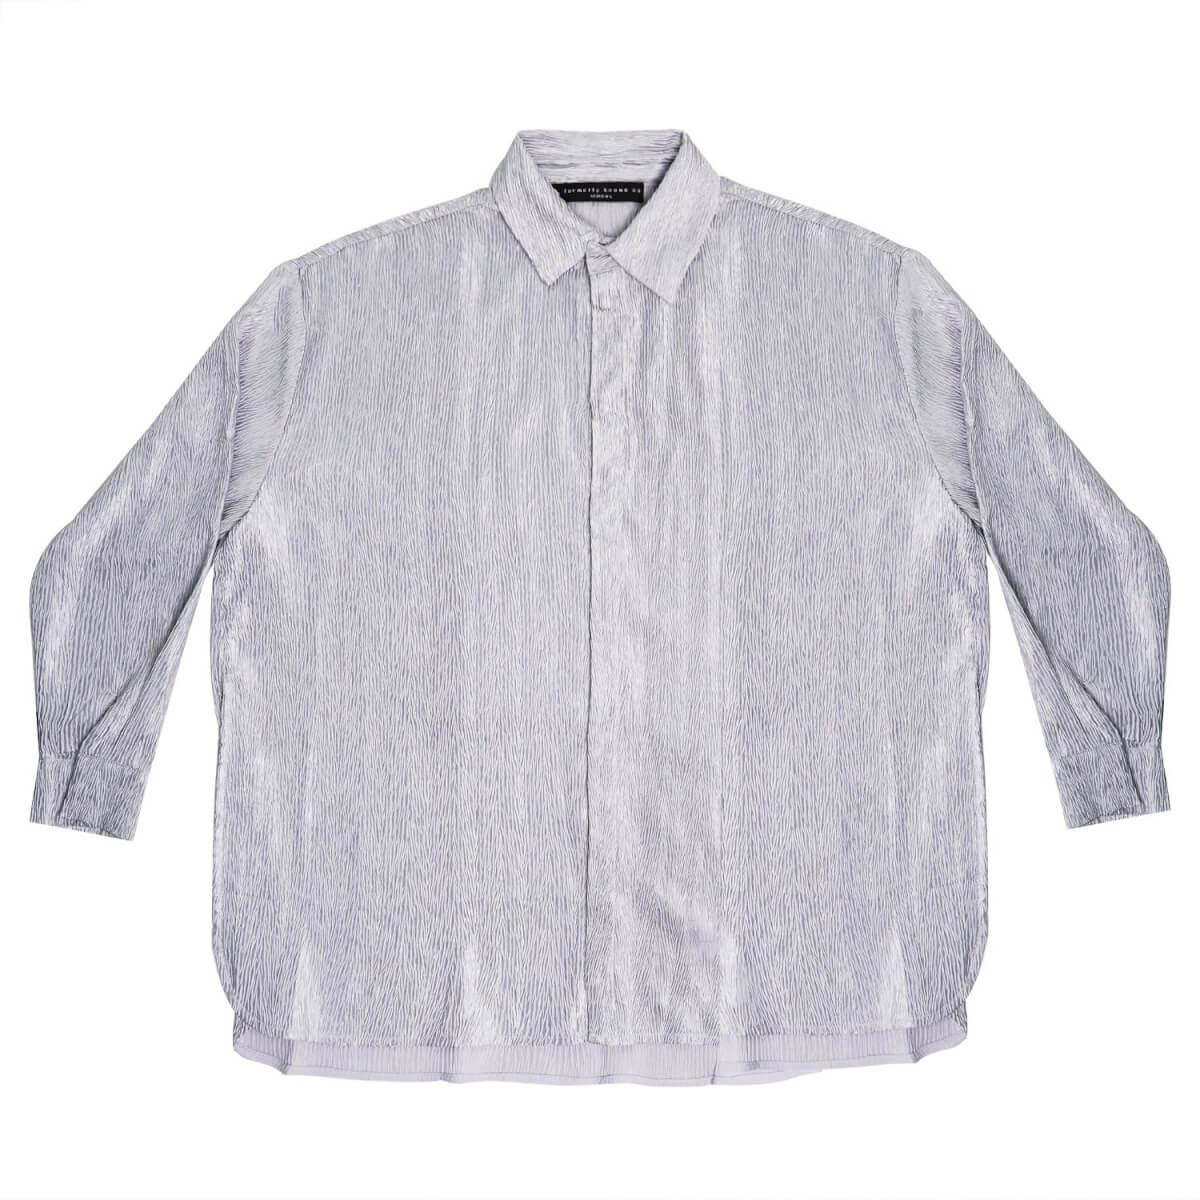 Men's Silver The Textured Shirt S/M Formerly Known As